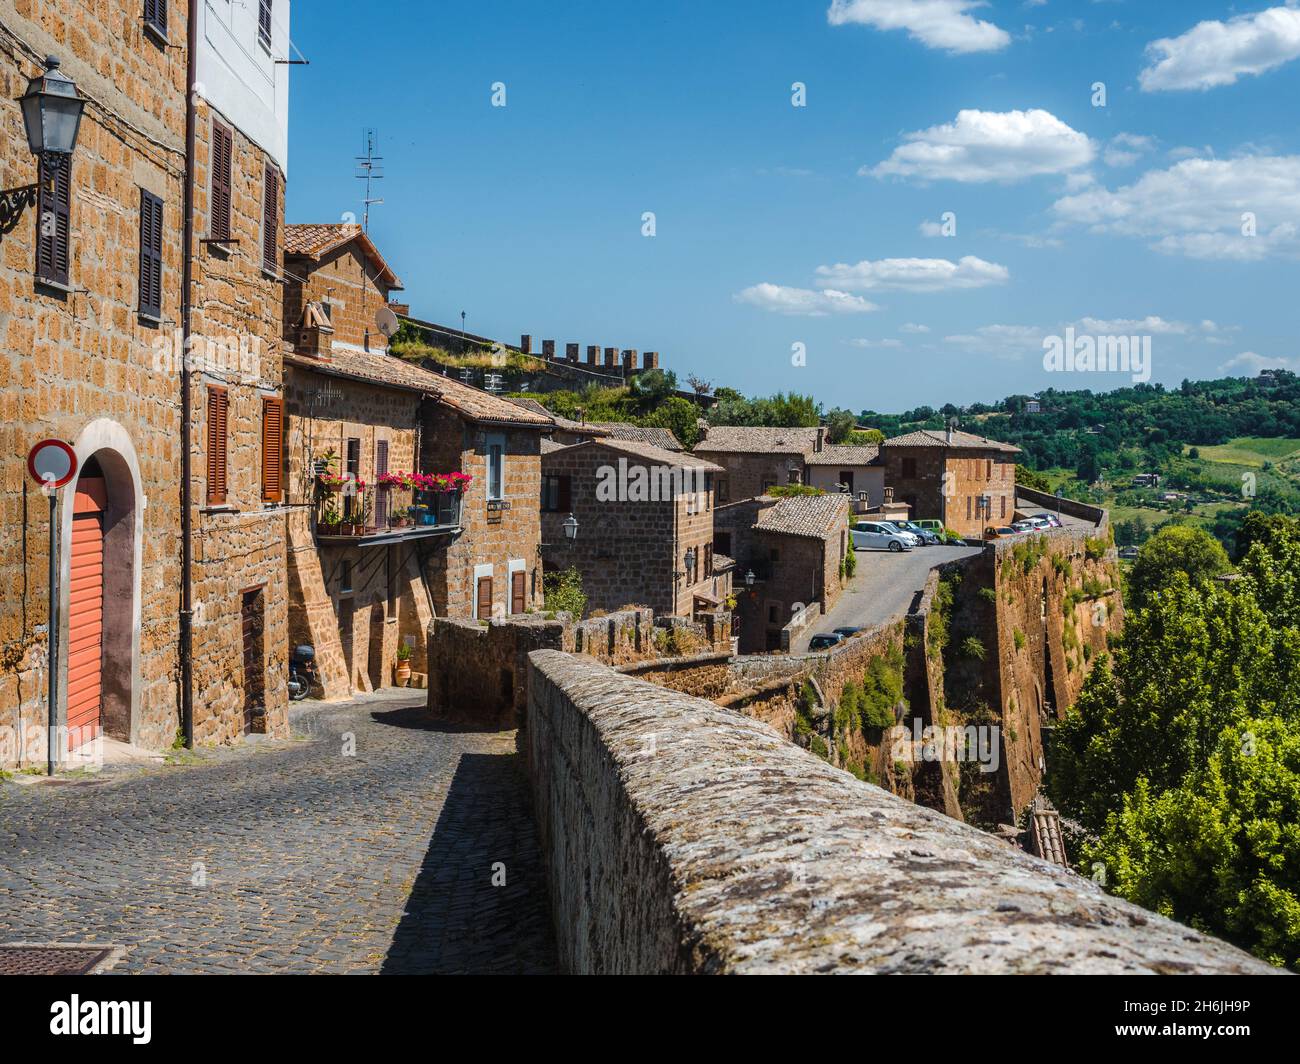 The boundaries of the old town and its ancient walls, Orvieto, Umbria, Italy, Europe Stock Photo